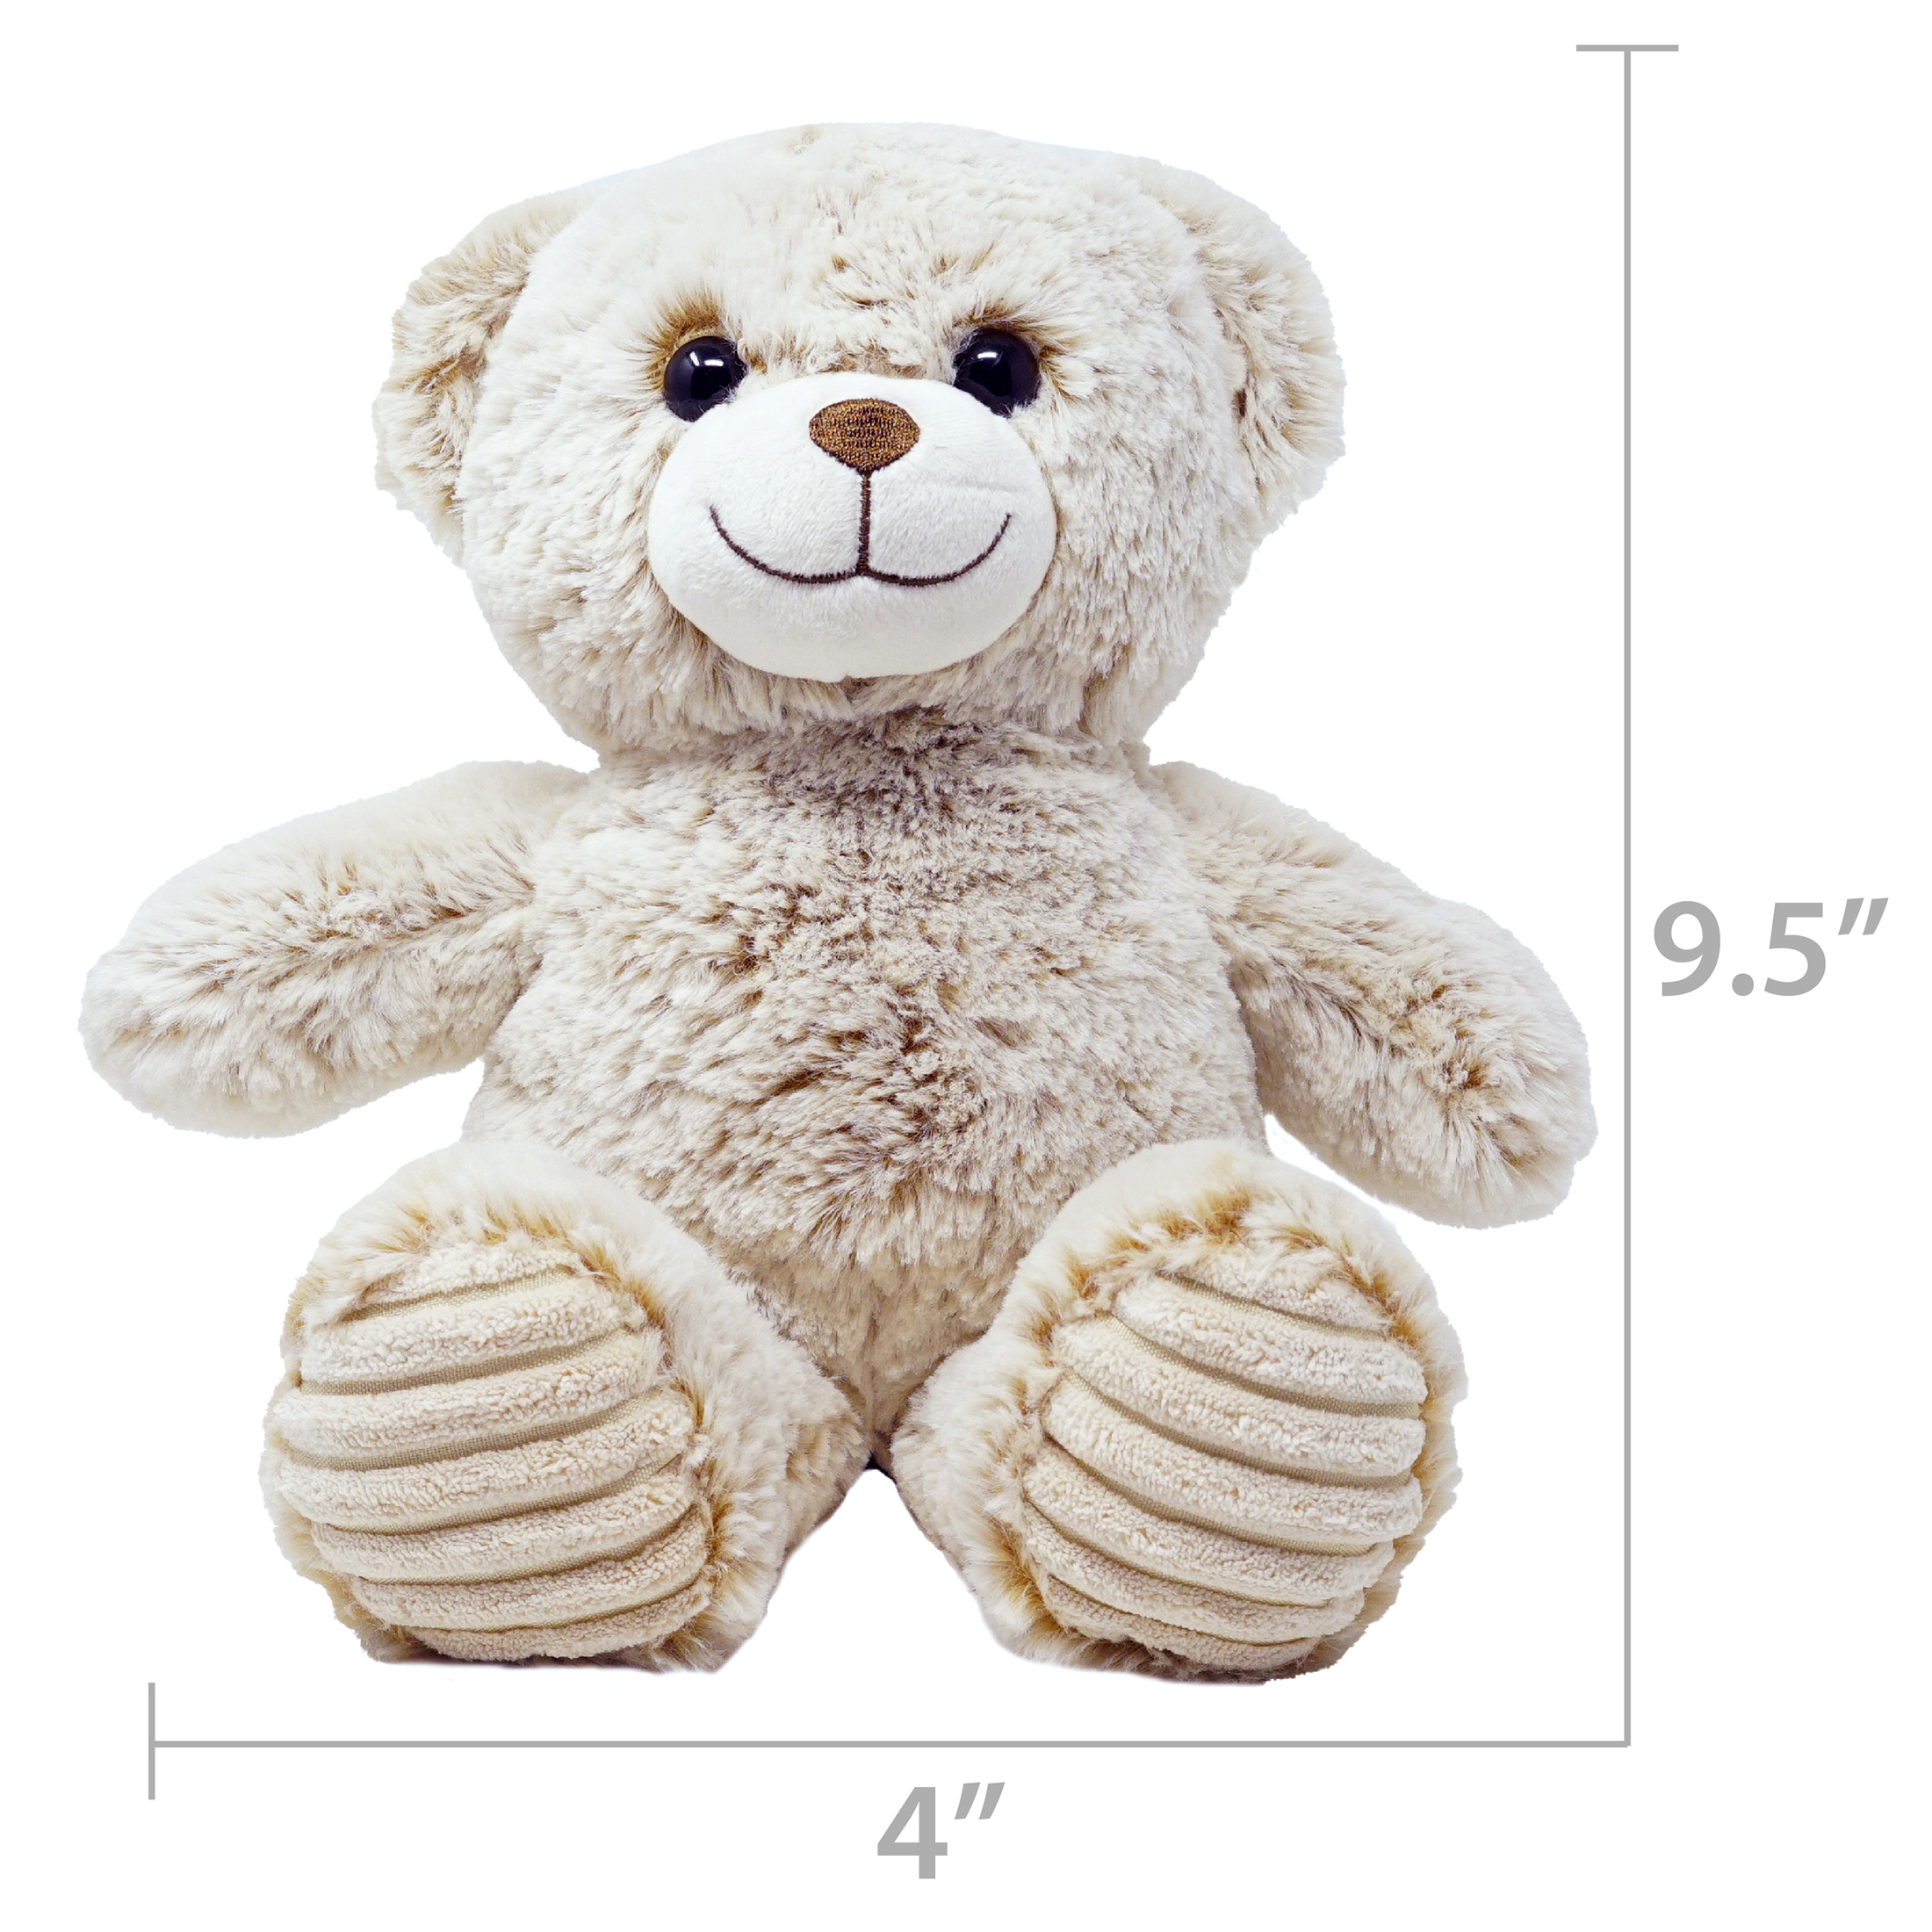 Spark Create Imagine Teddy Bears Plush Toy 14” Overall-Beige and Brown - image 1 of 6